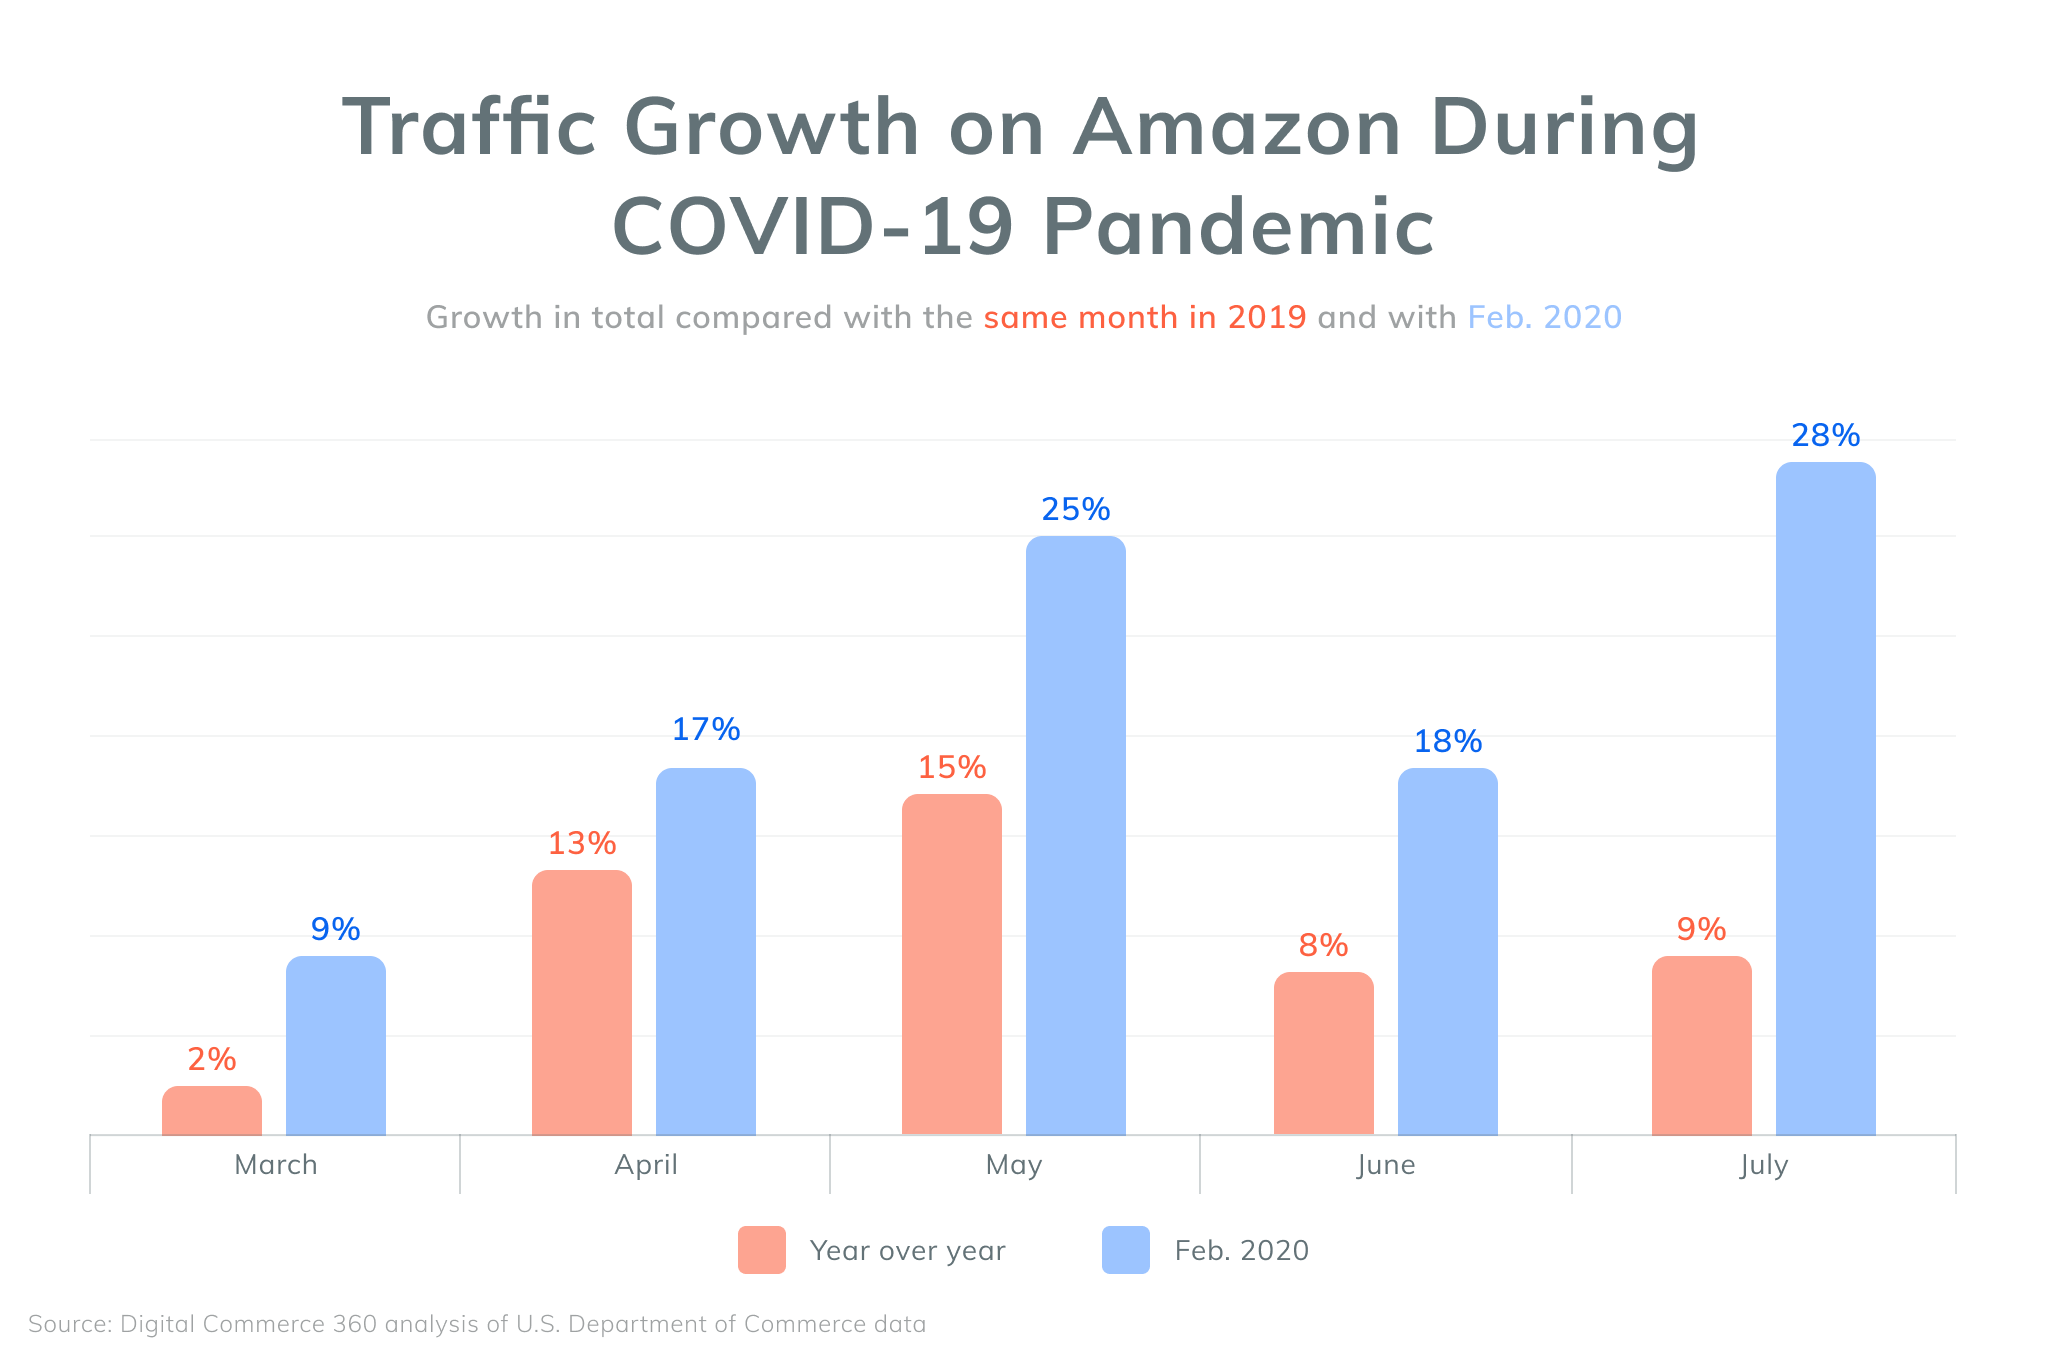 Traffic Growth on Amazon During COVID-19 Pandemic